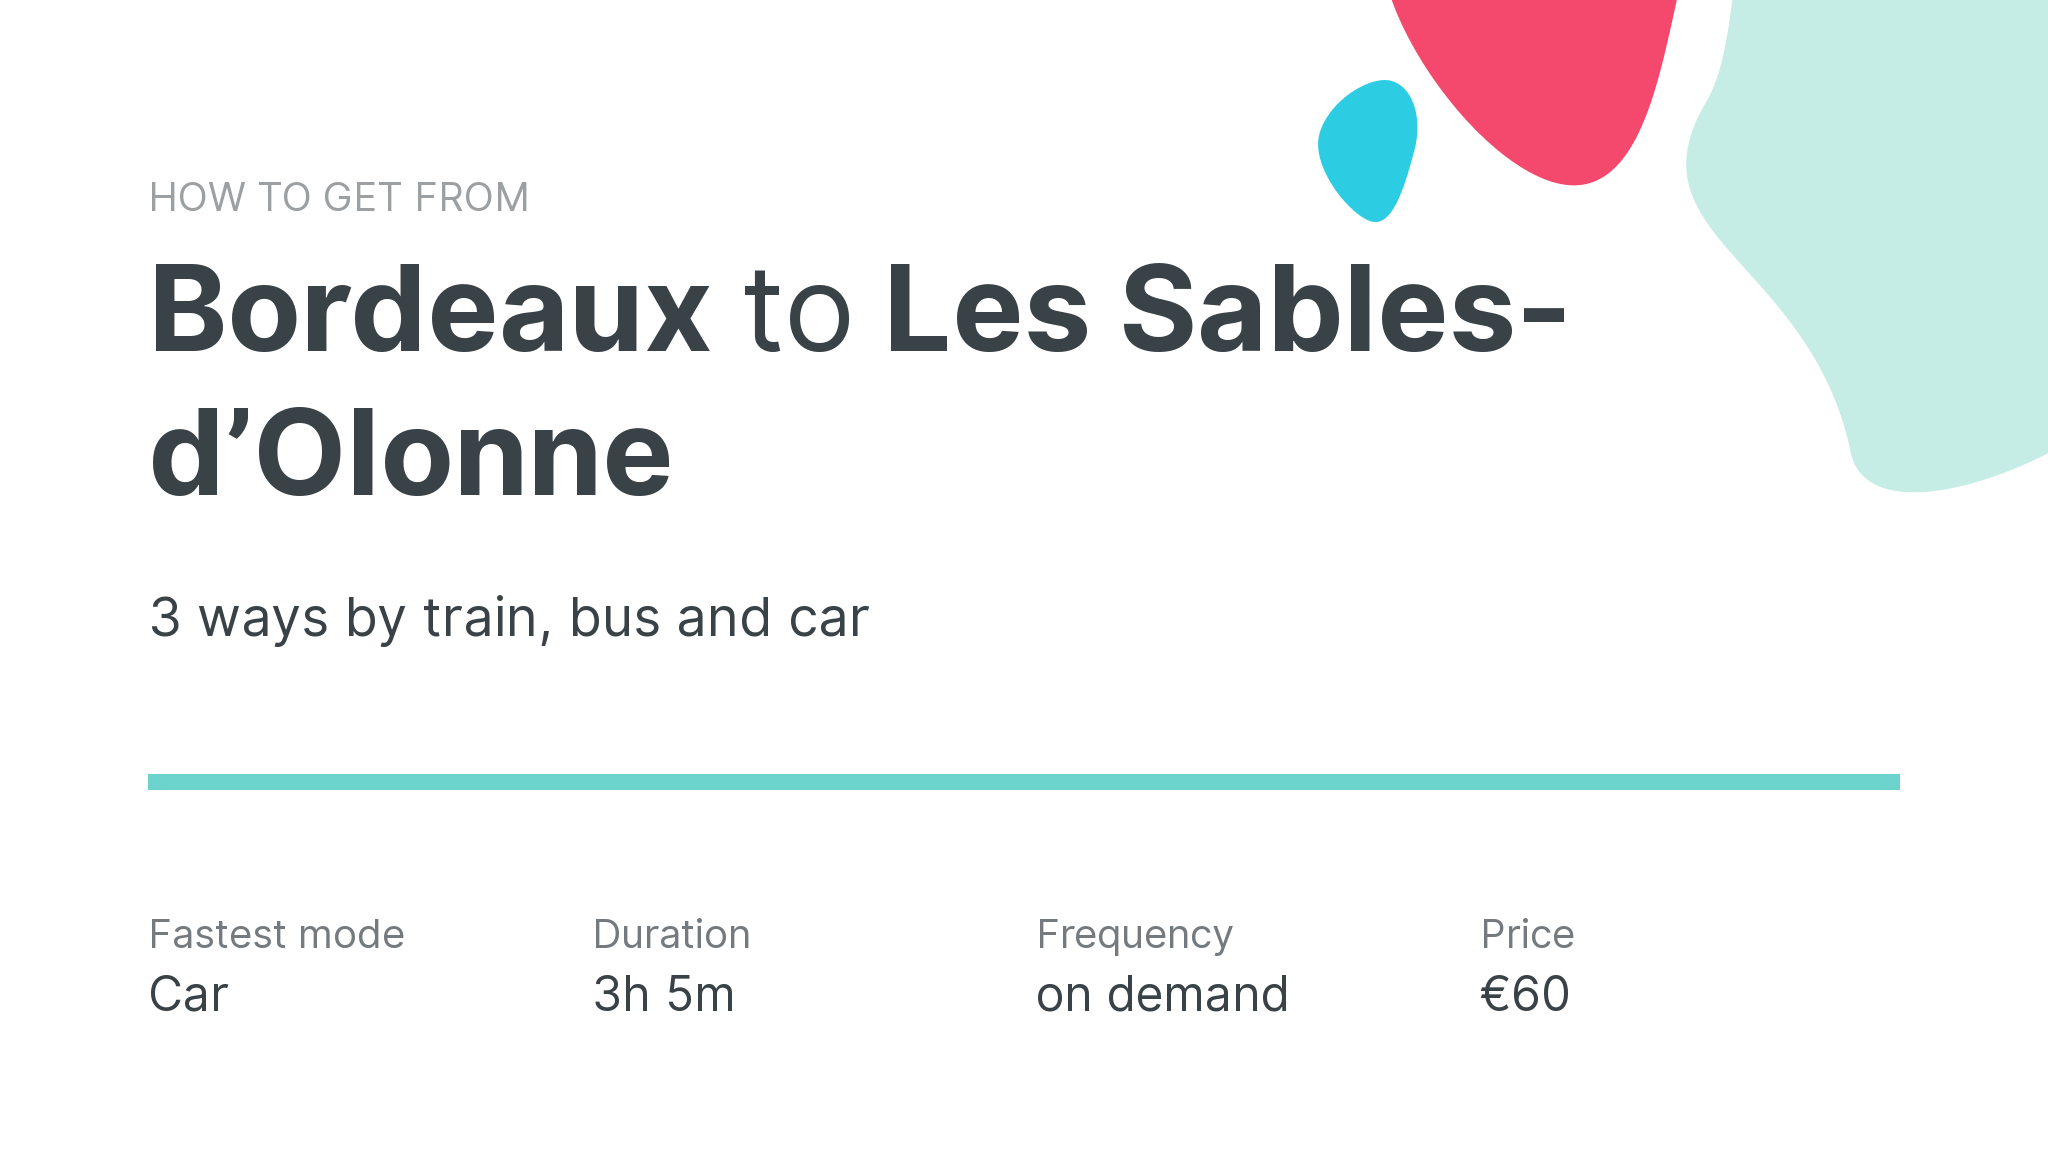 How do I get from Bordeaux to Les Sables-dʼOlonne